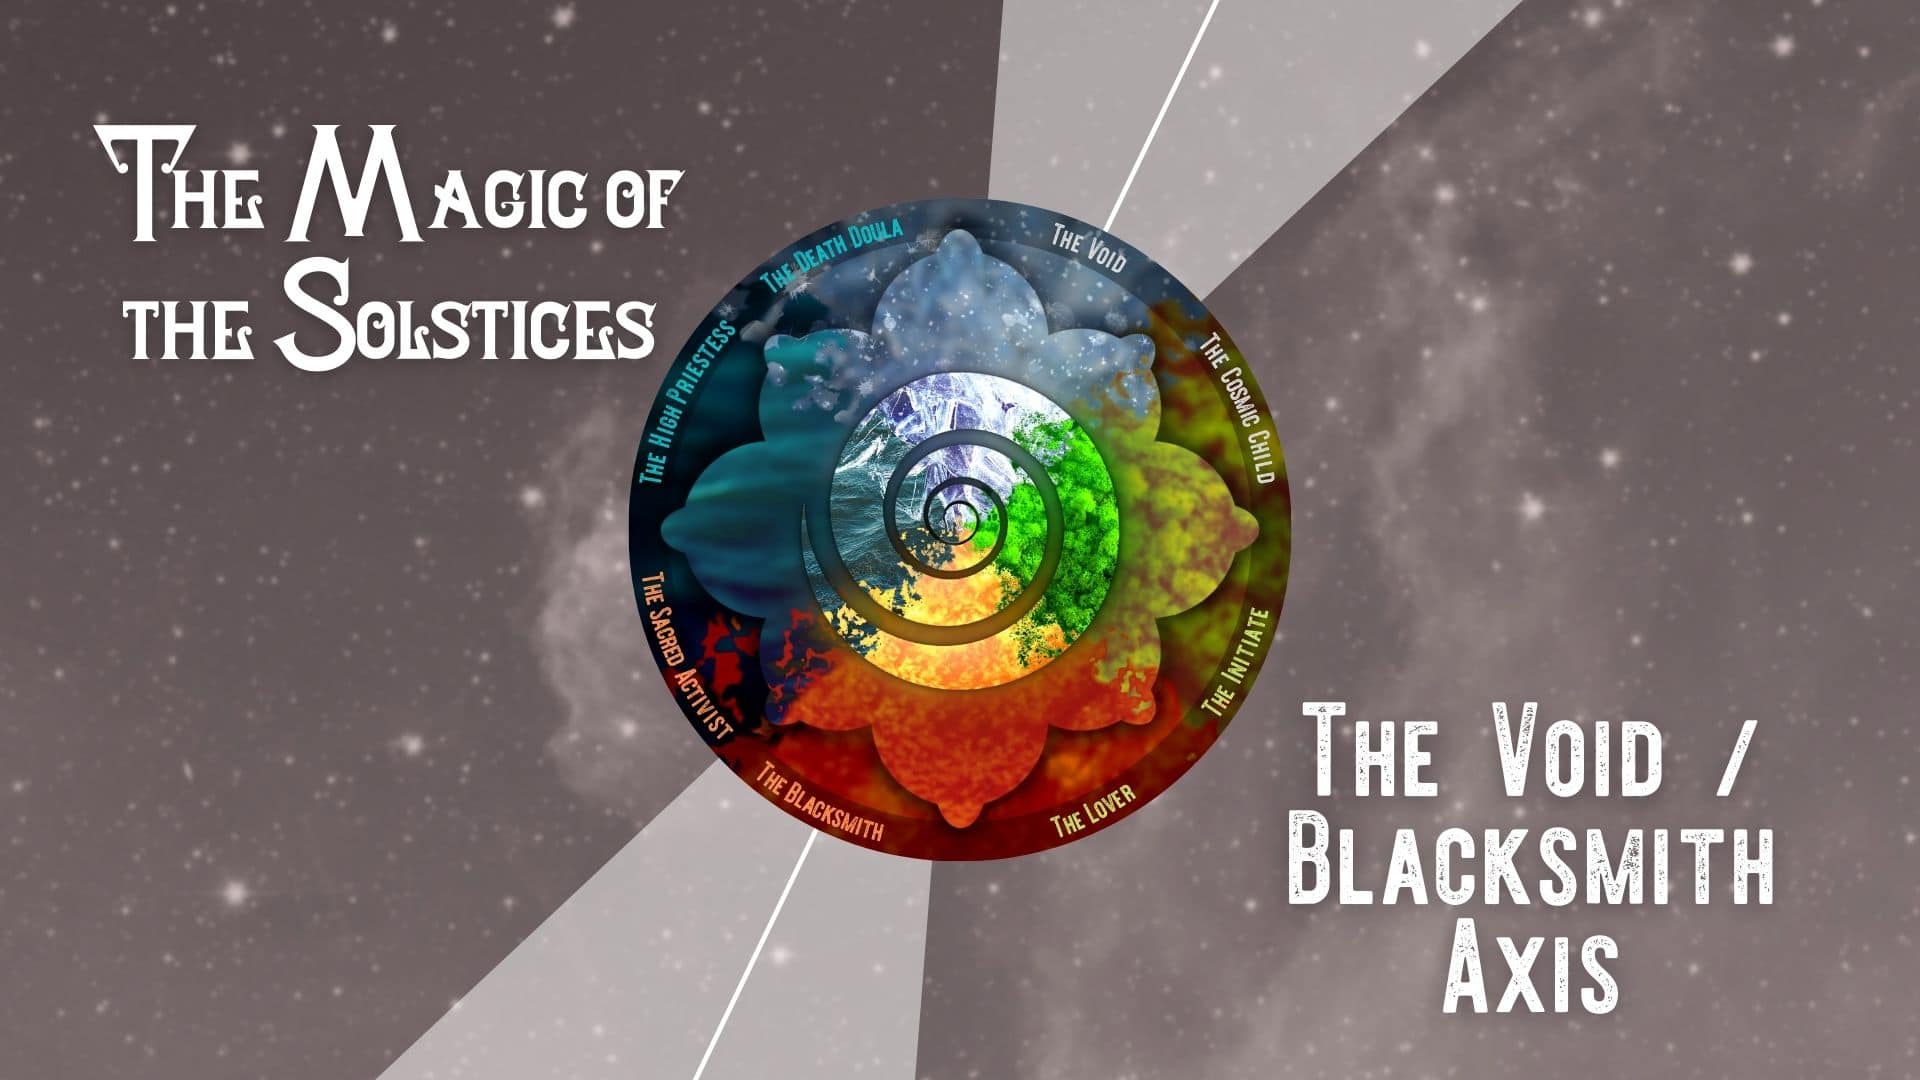 The Magic of the Solstices: The Void/Blacksmith Axis